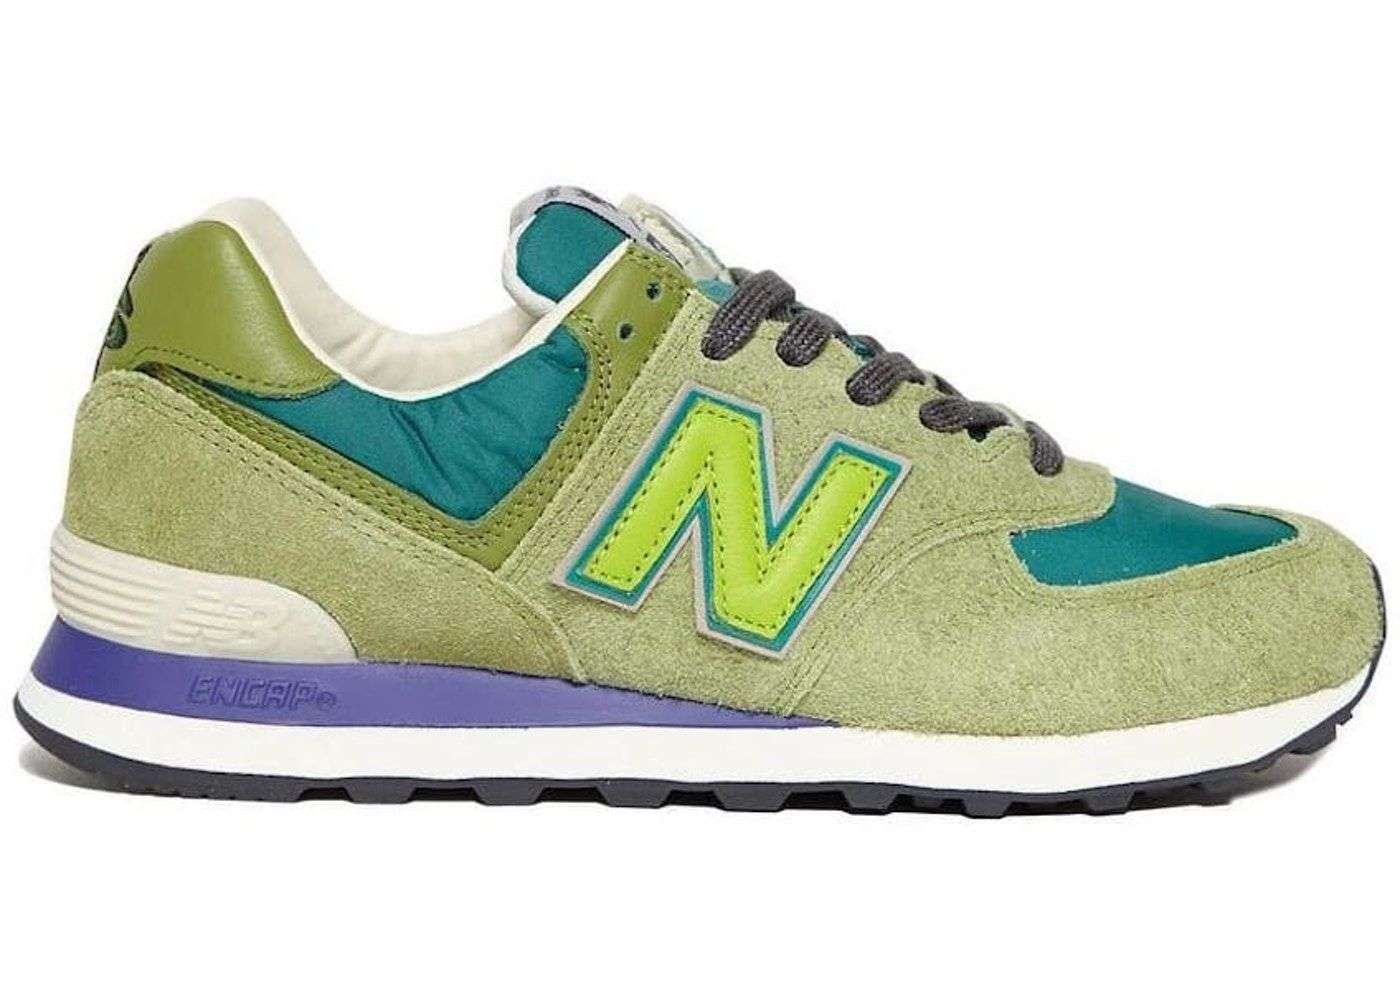 Buy and sell authentic New Balance shoes on StockX ...